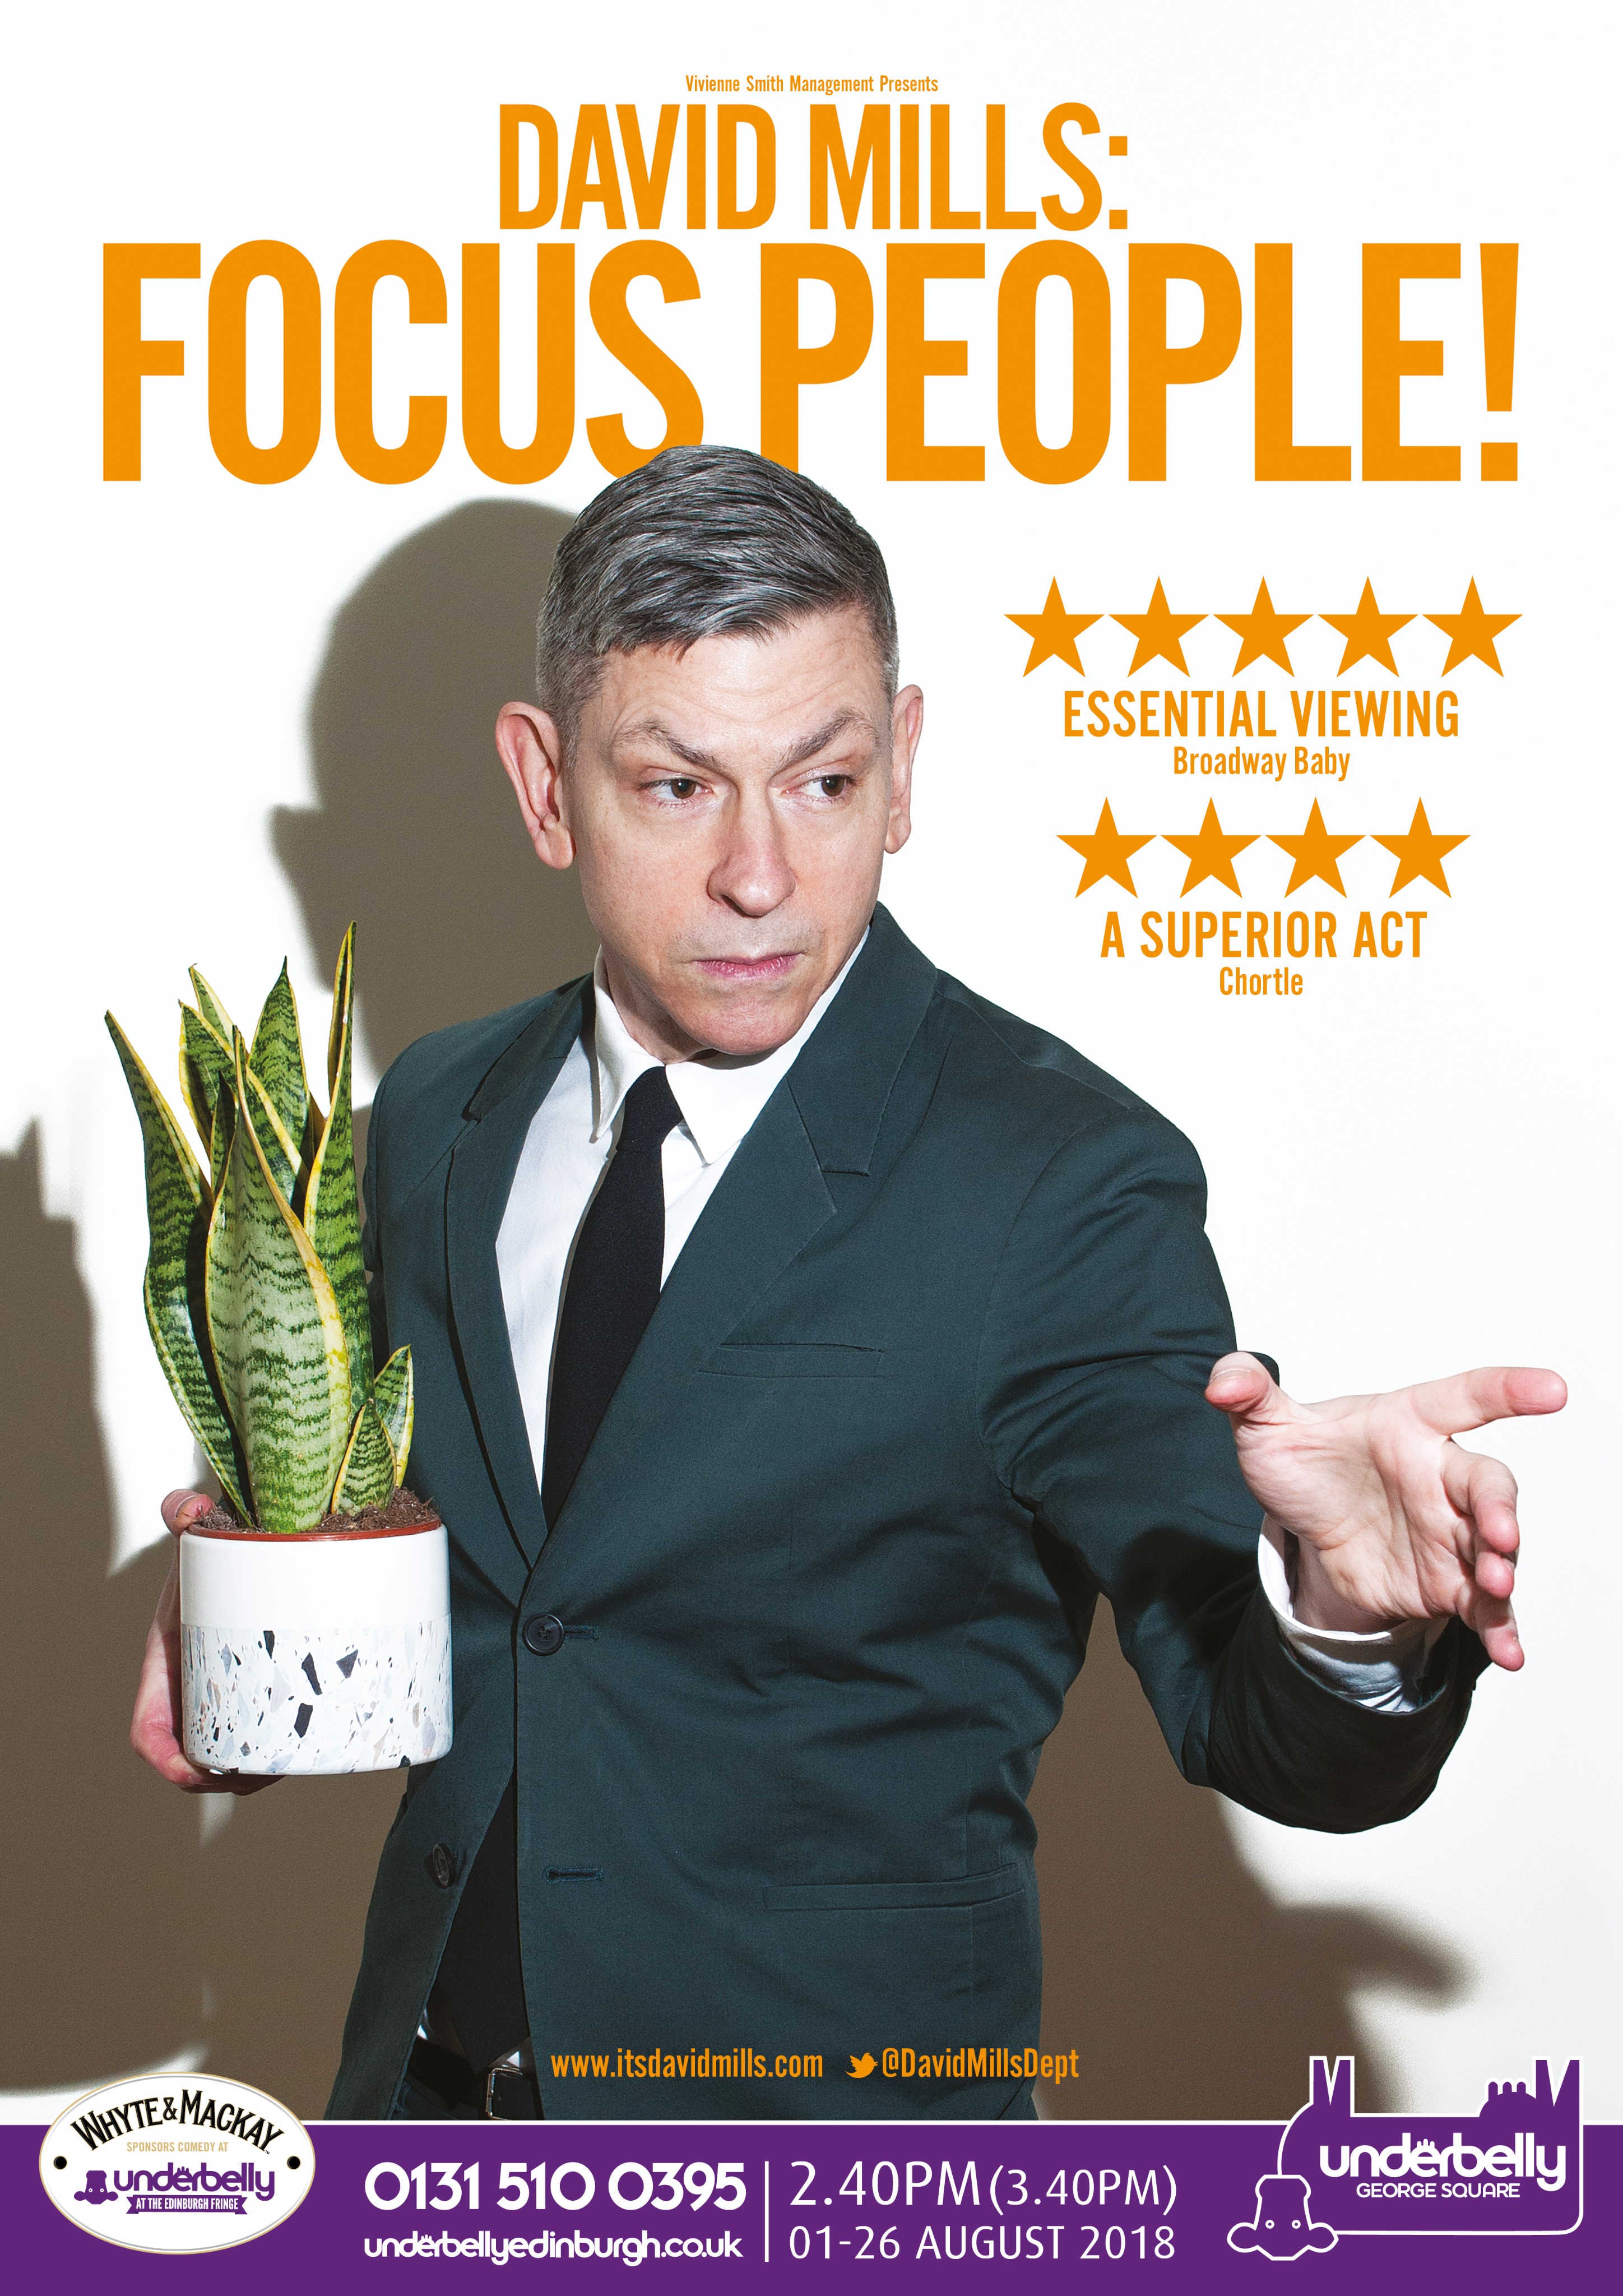 The poster for David Mills: Focus People!